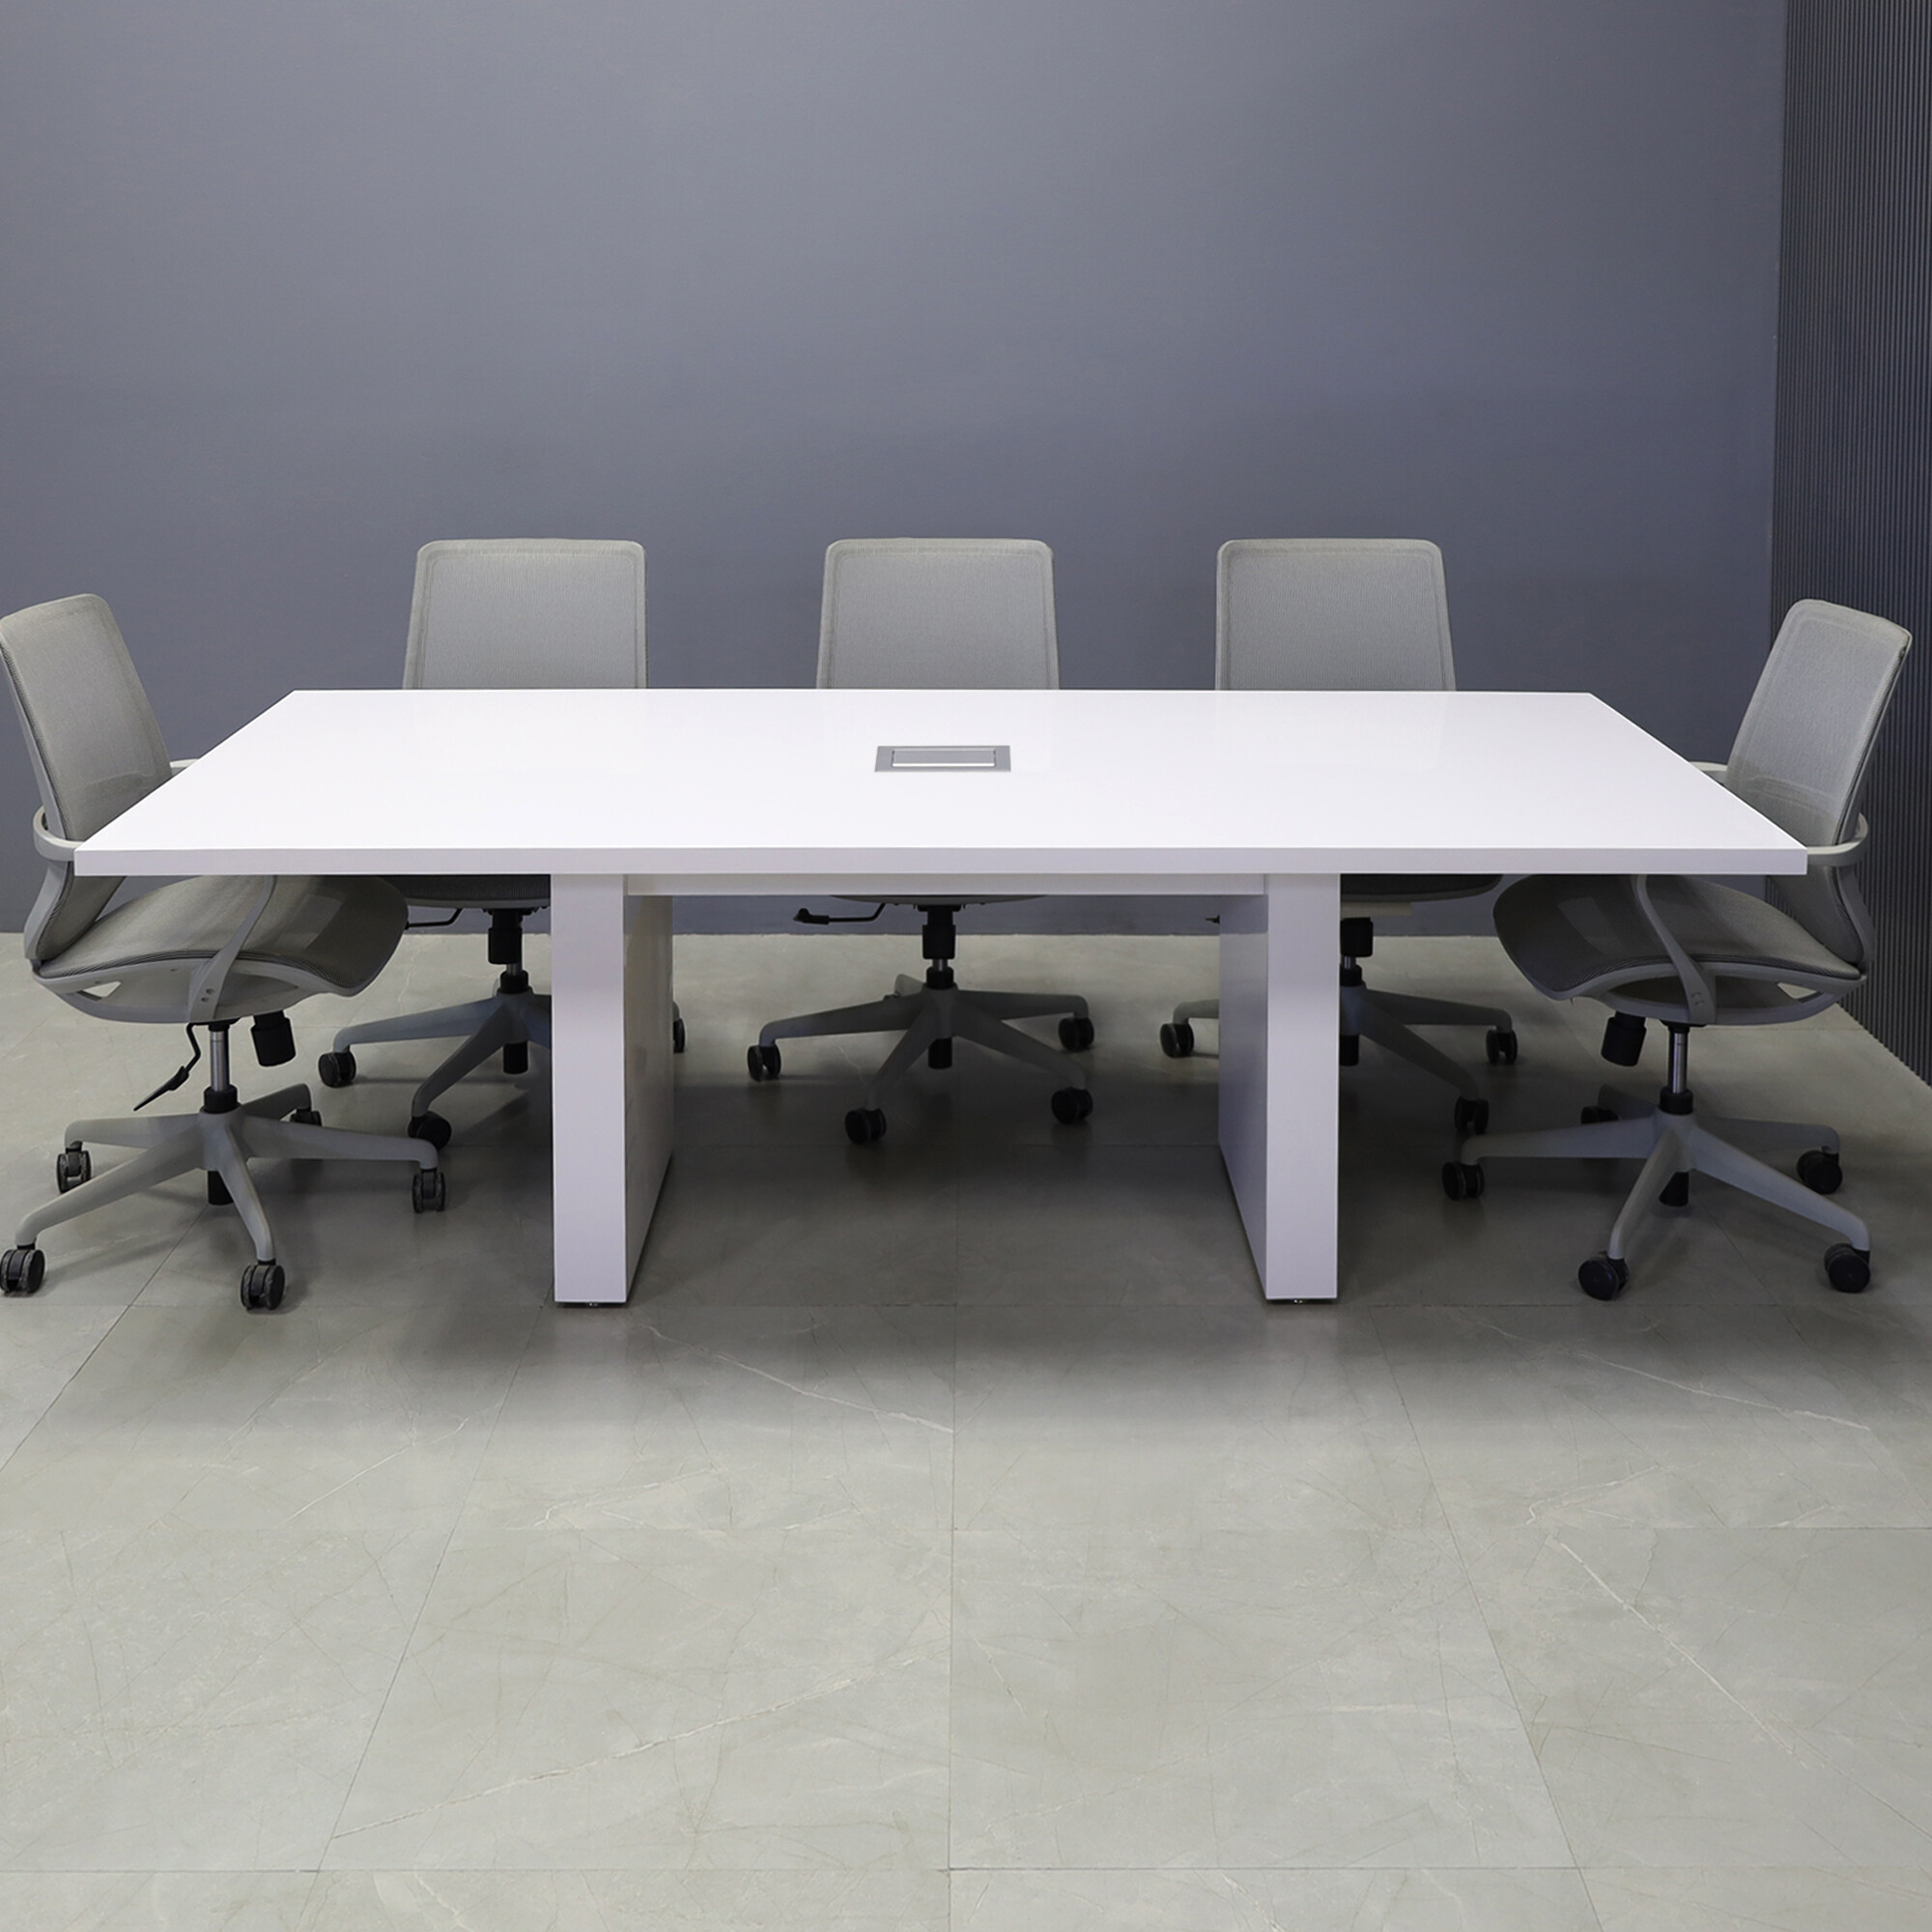 90-inch Newton Rectangular Conference Table in white gloss laminate for the top and base, with one silver MX2 powerbox, shown here.